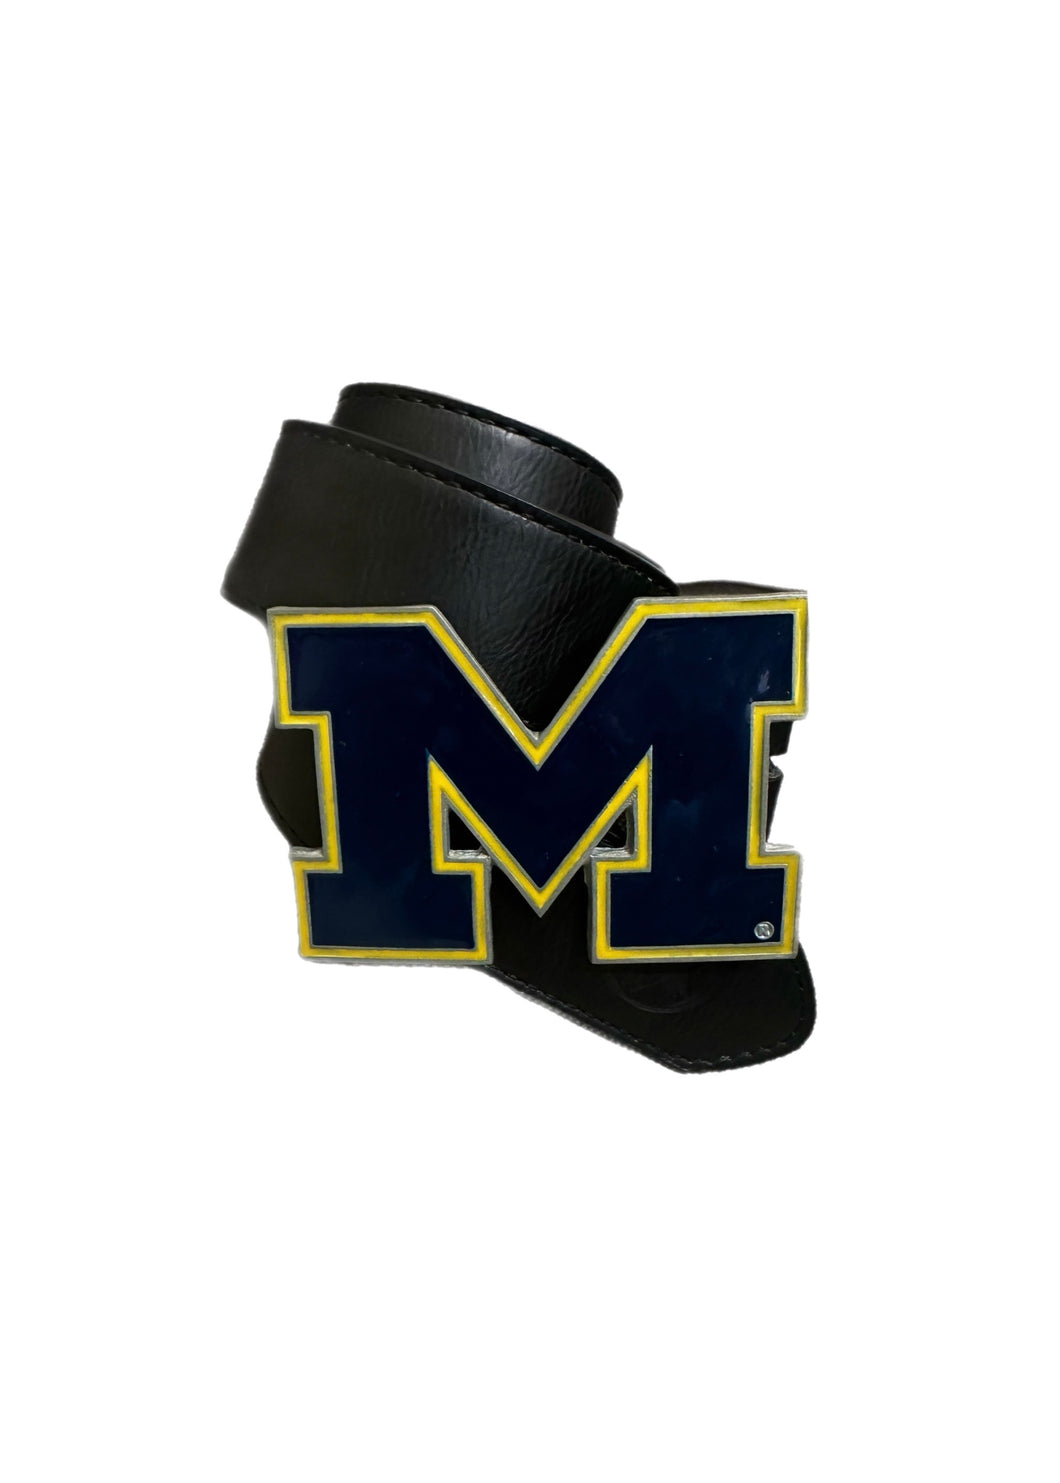 University of Michigan Vintage Belt Buckle with New Soft Leather Strap